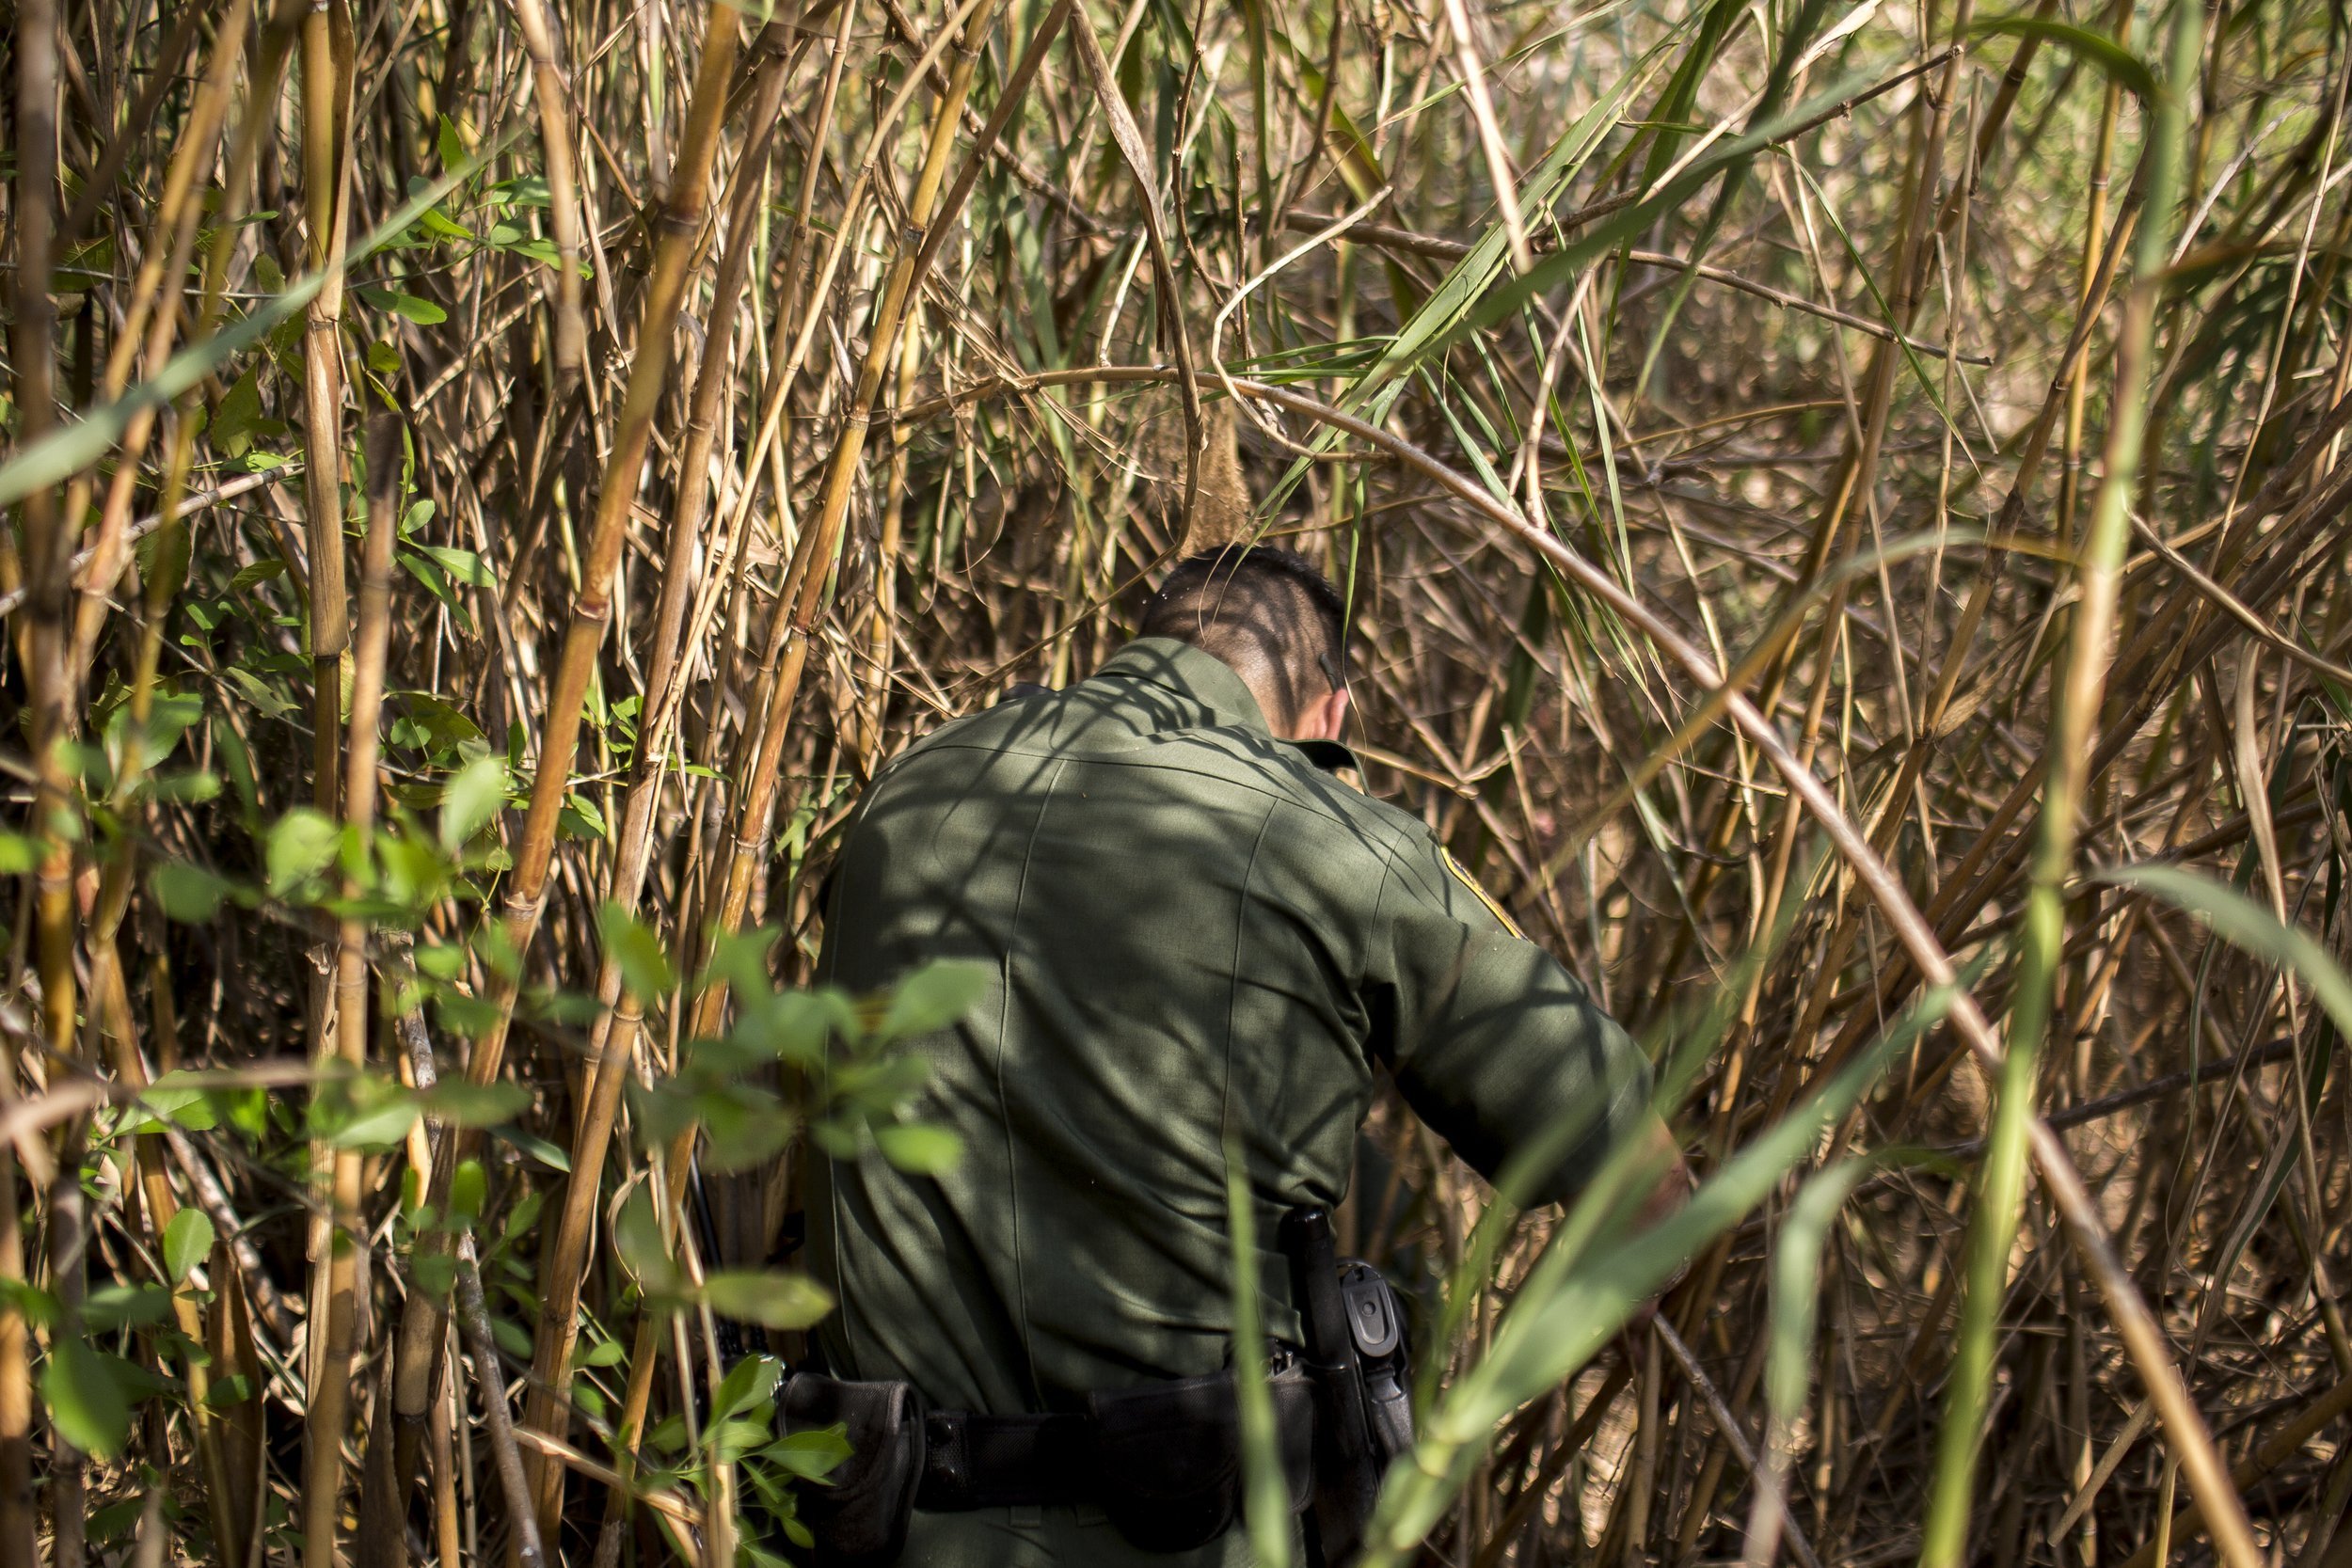  Border Patrol Agent Isaac Villegas makes his way through the thick growth of reeds known as "carrizo" lining the the Rio Grande riverbank in Roma, TX, while searching for a group of five undocumented immigrants reported to have crossed the river in 